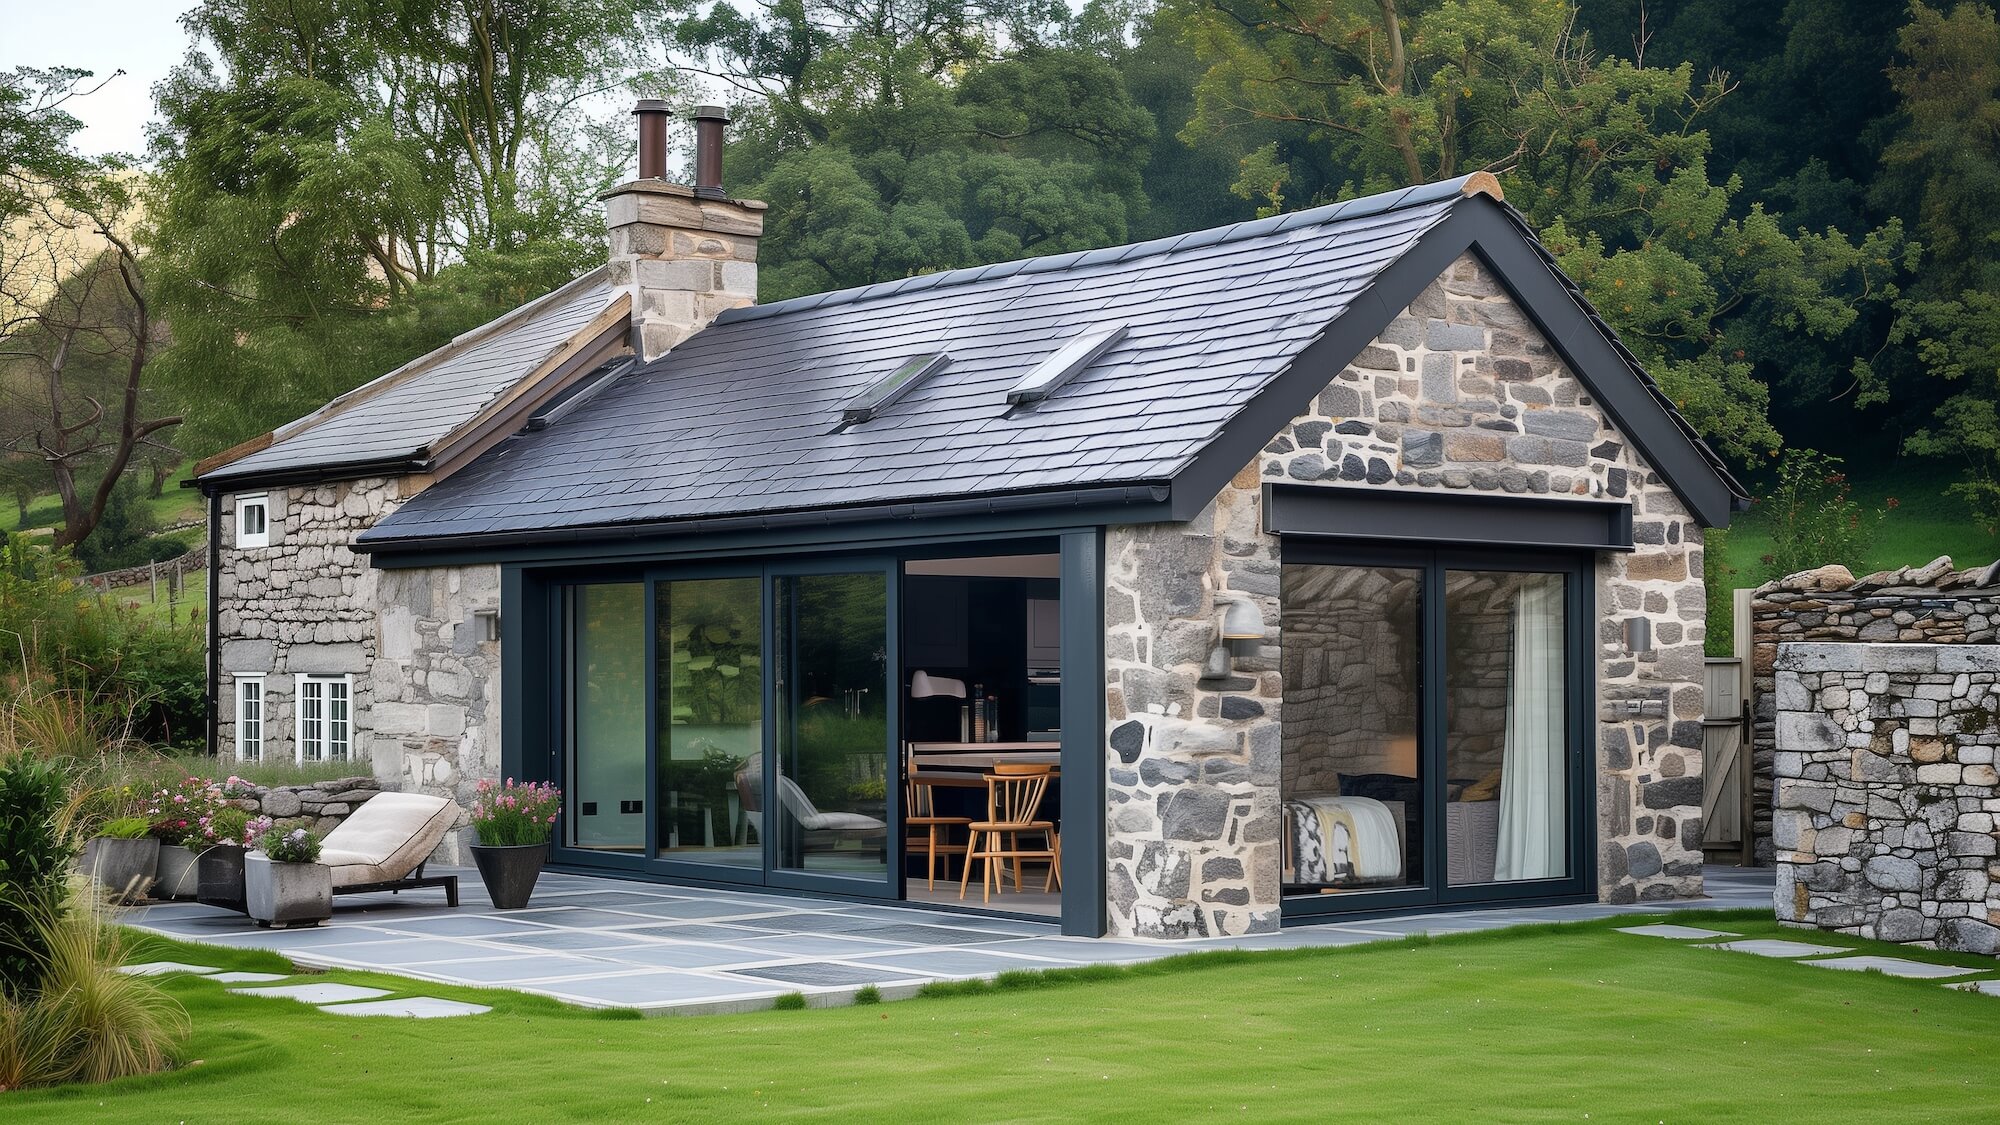 Converting outbuildings to living accommodation - How Vision Planning can help you.